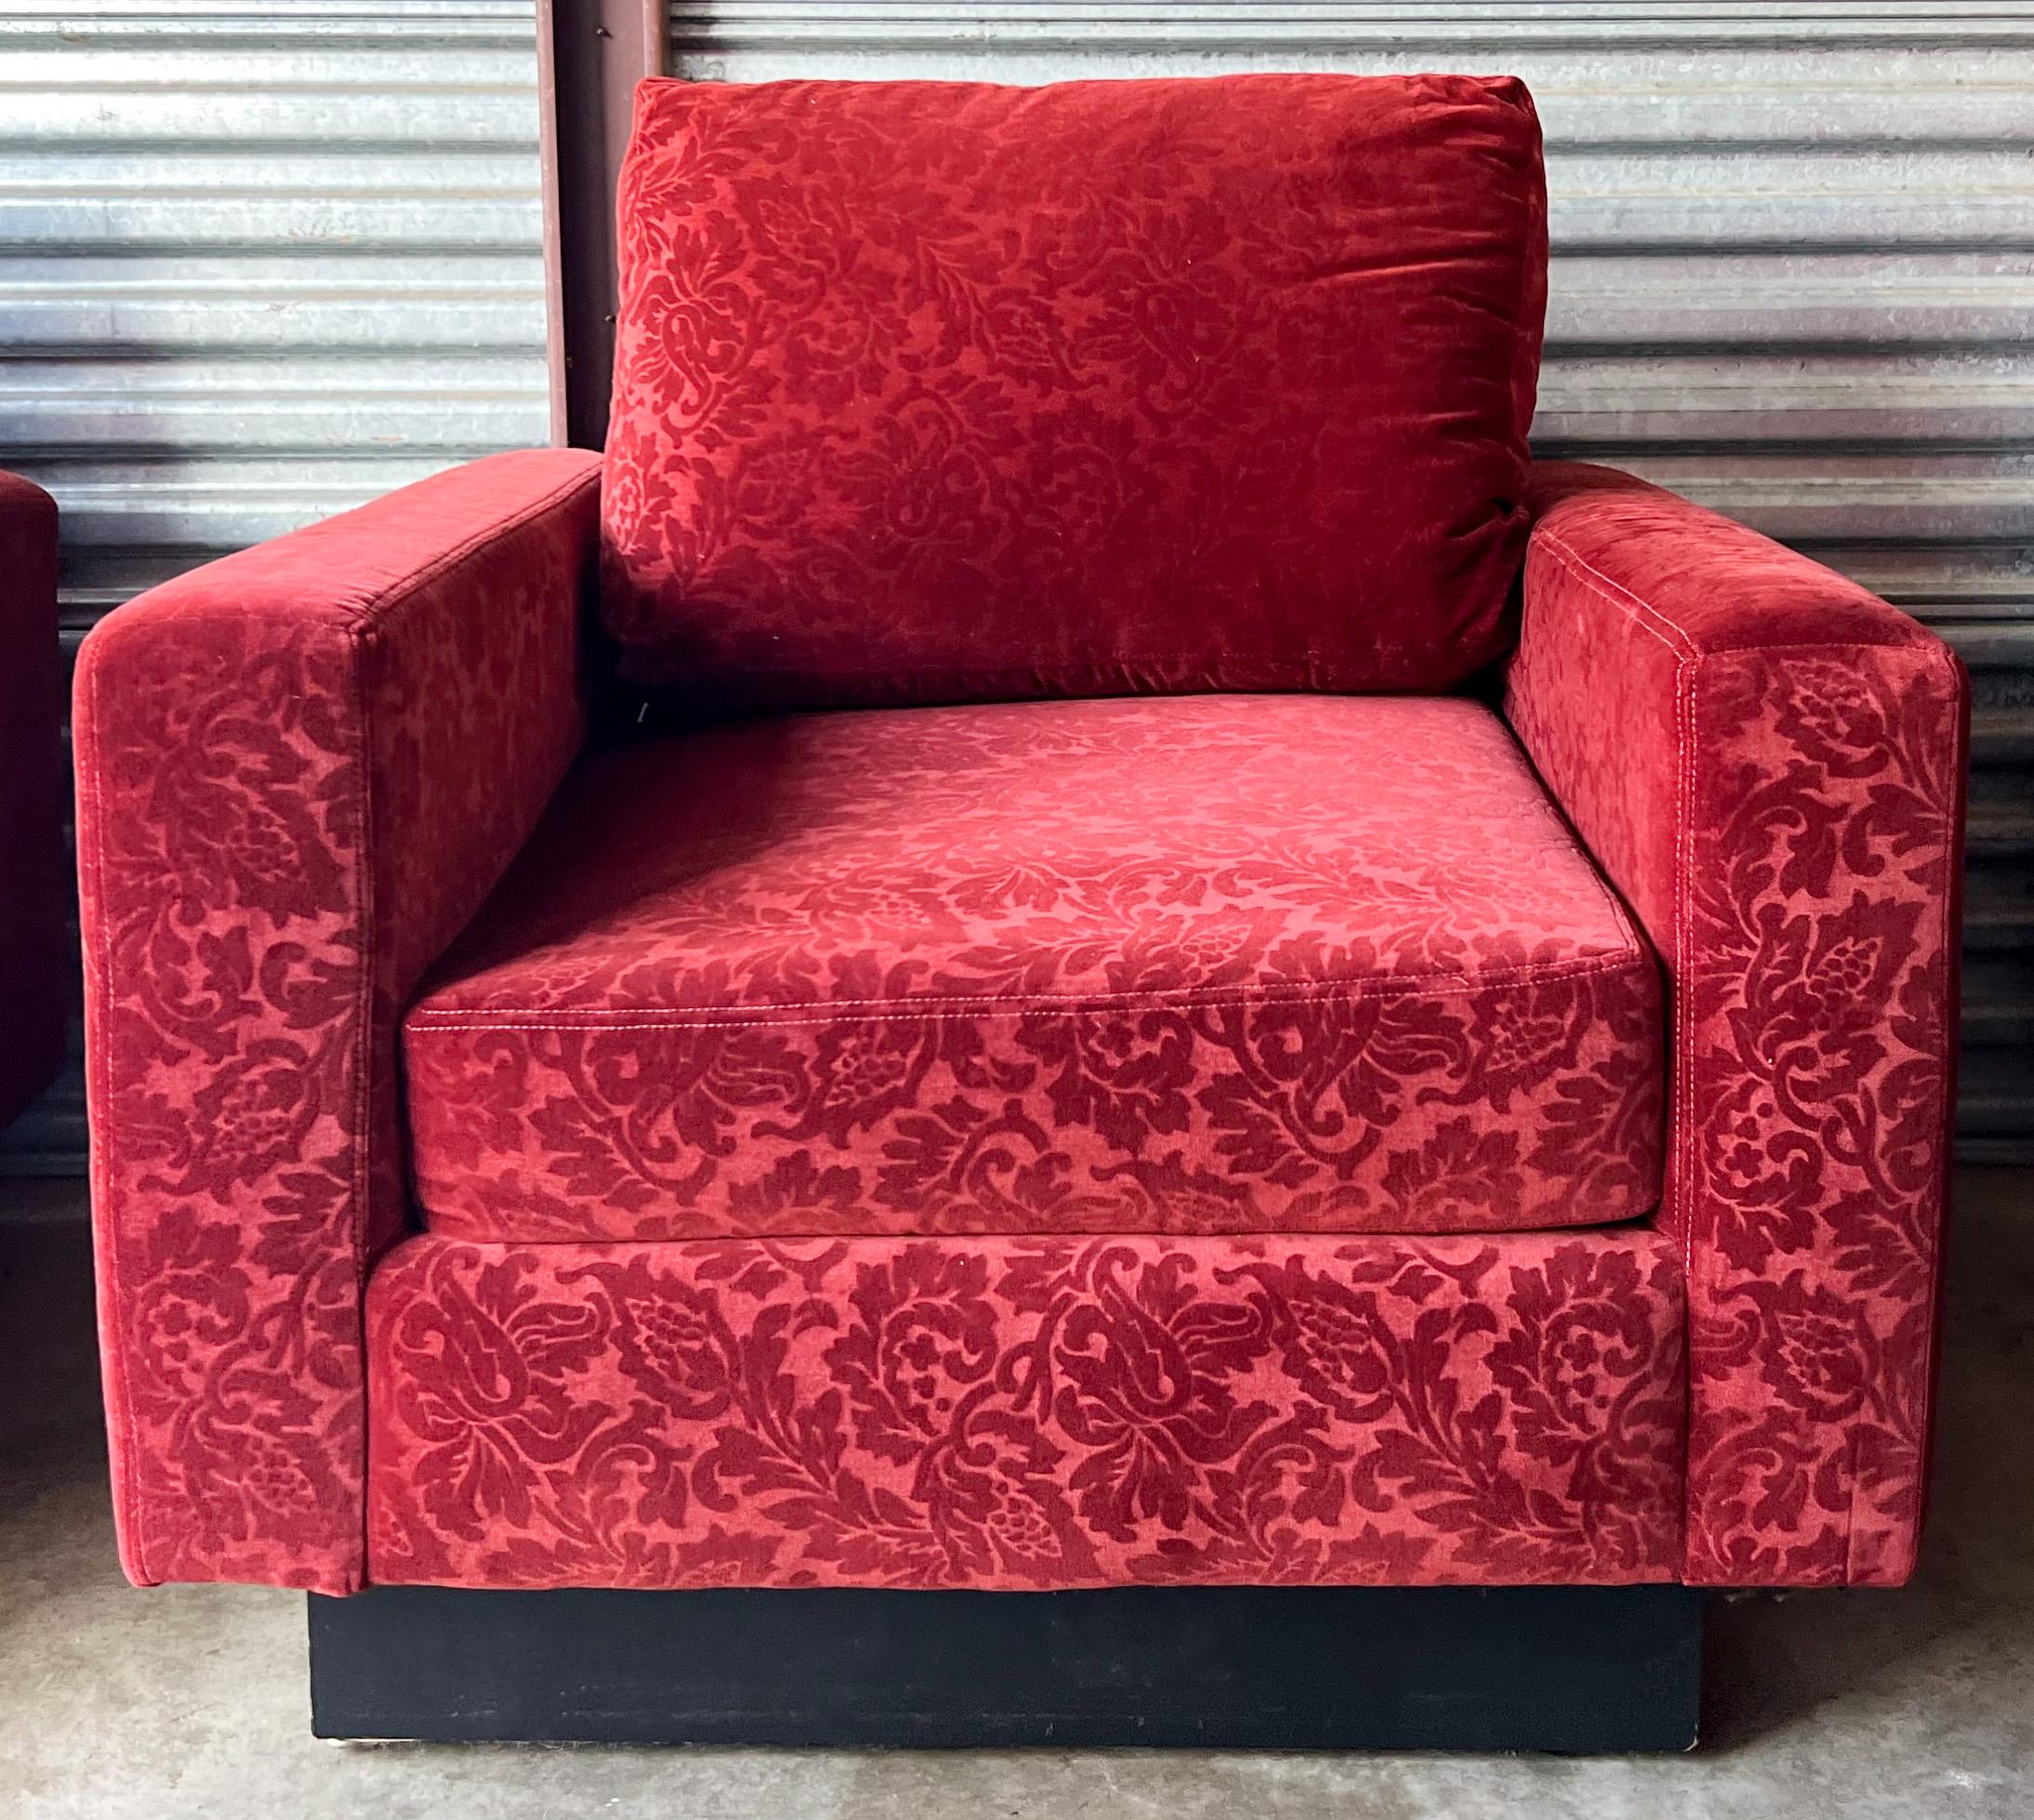 This is a pair of Italian mid-century modern club chairs by Maurice Villency. They rest on a black painted wooden plinth. The garnet velvet is original and shows wear, They do have the original labels. I have the settee as well.

My shipping is